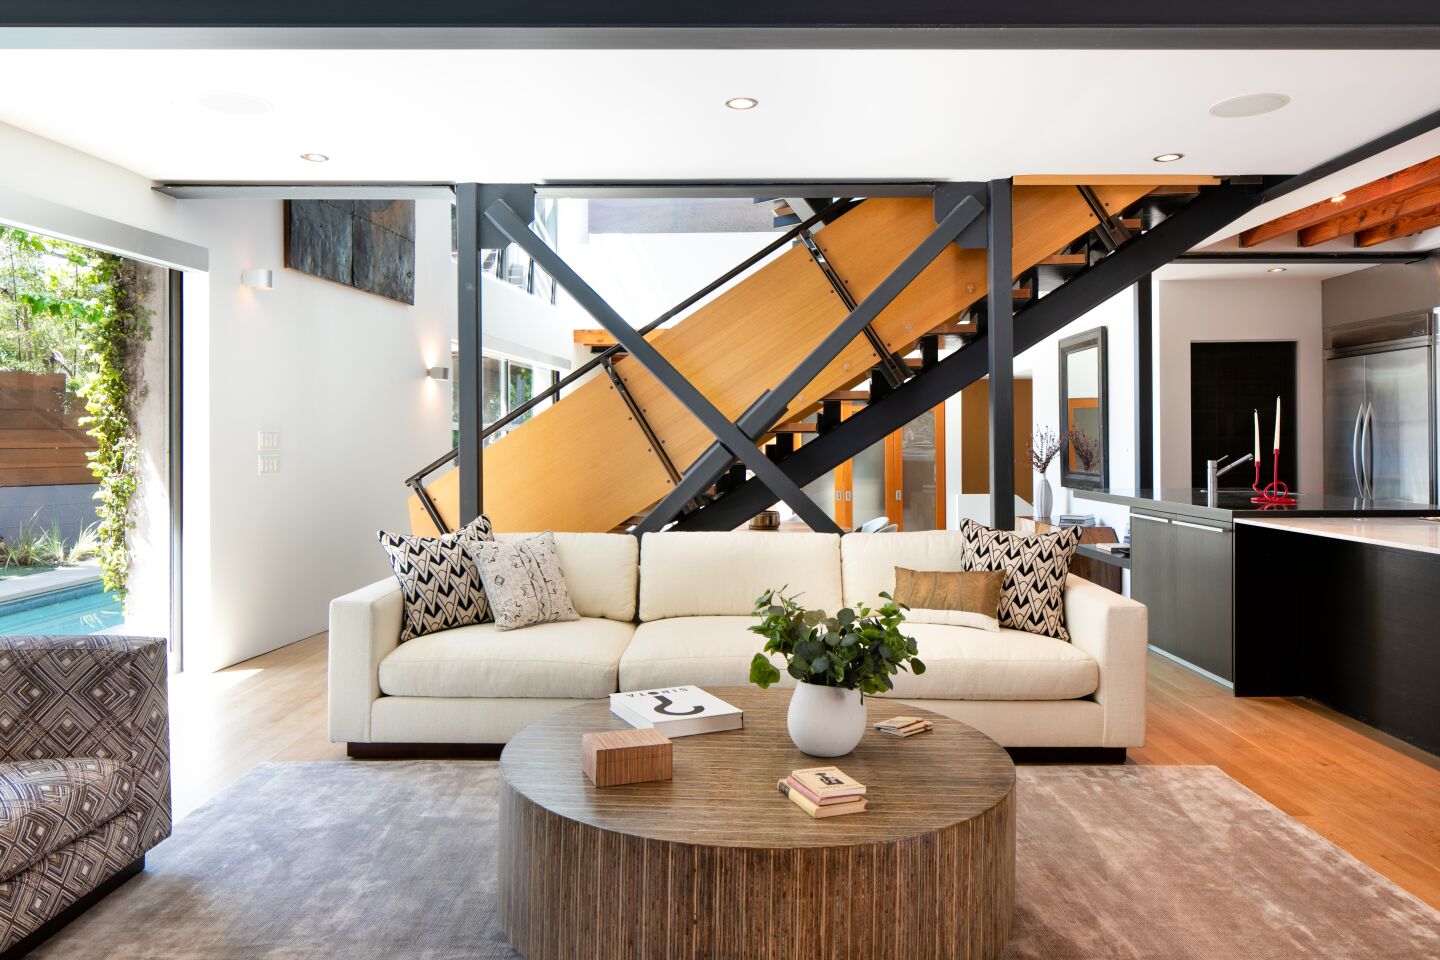 A sculptural staircase divides the living space on the main floor.